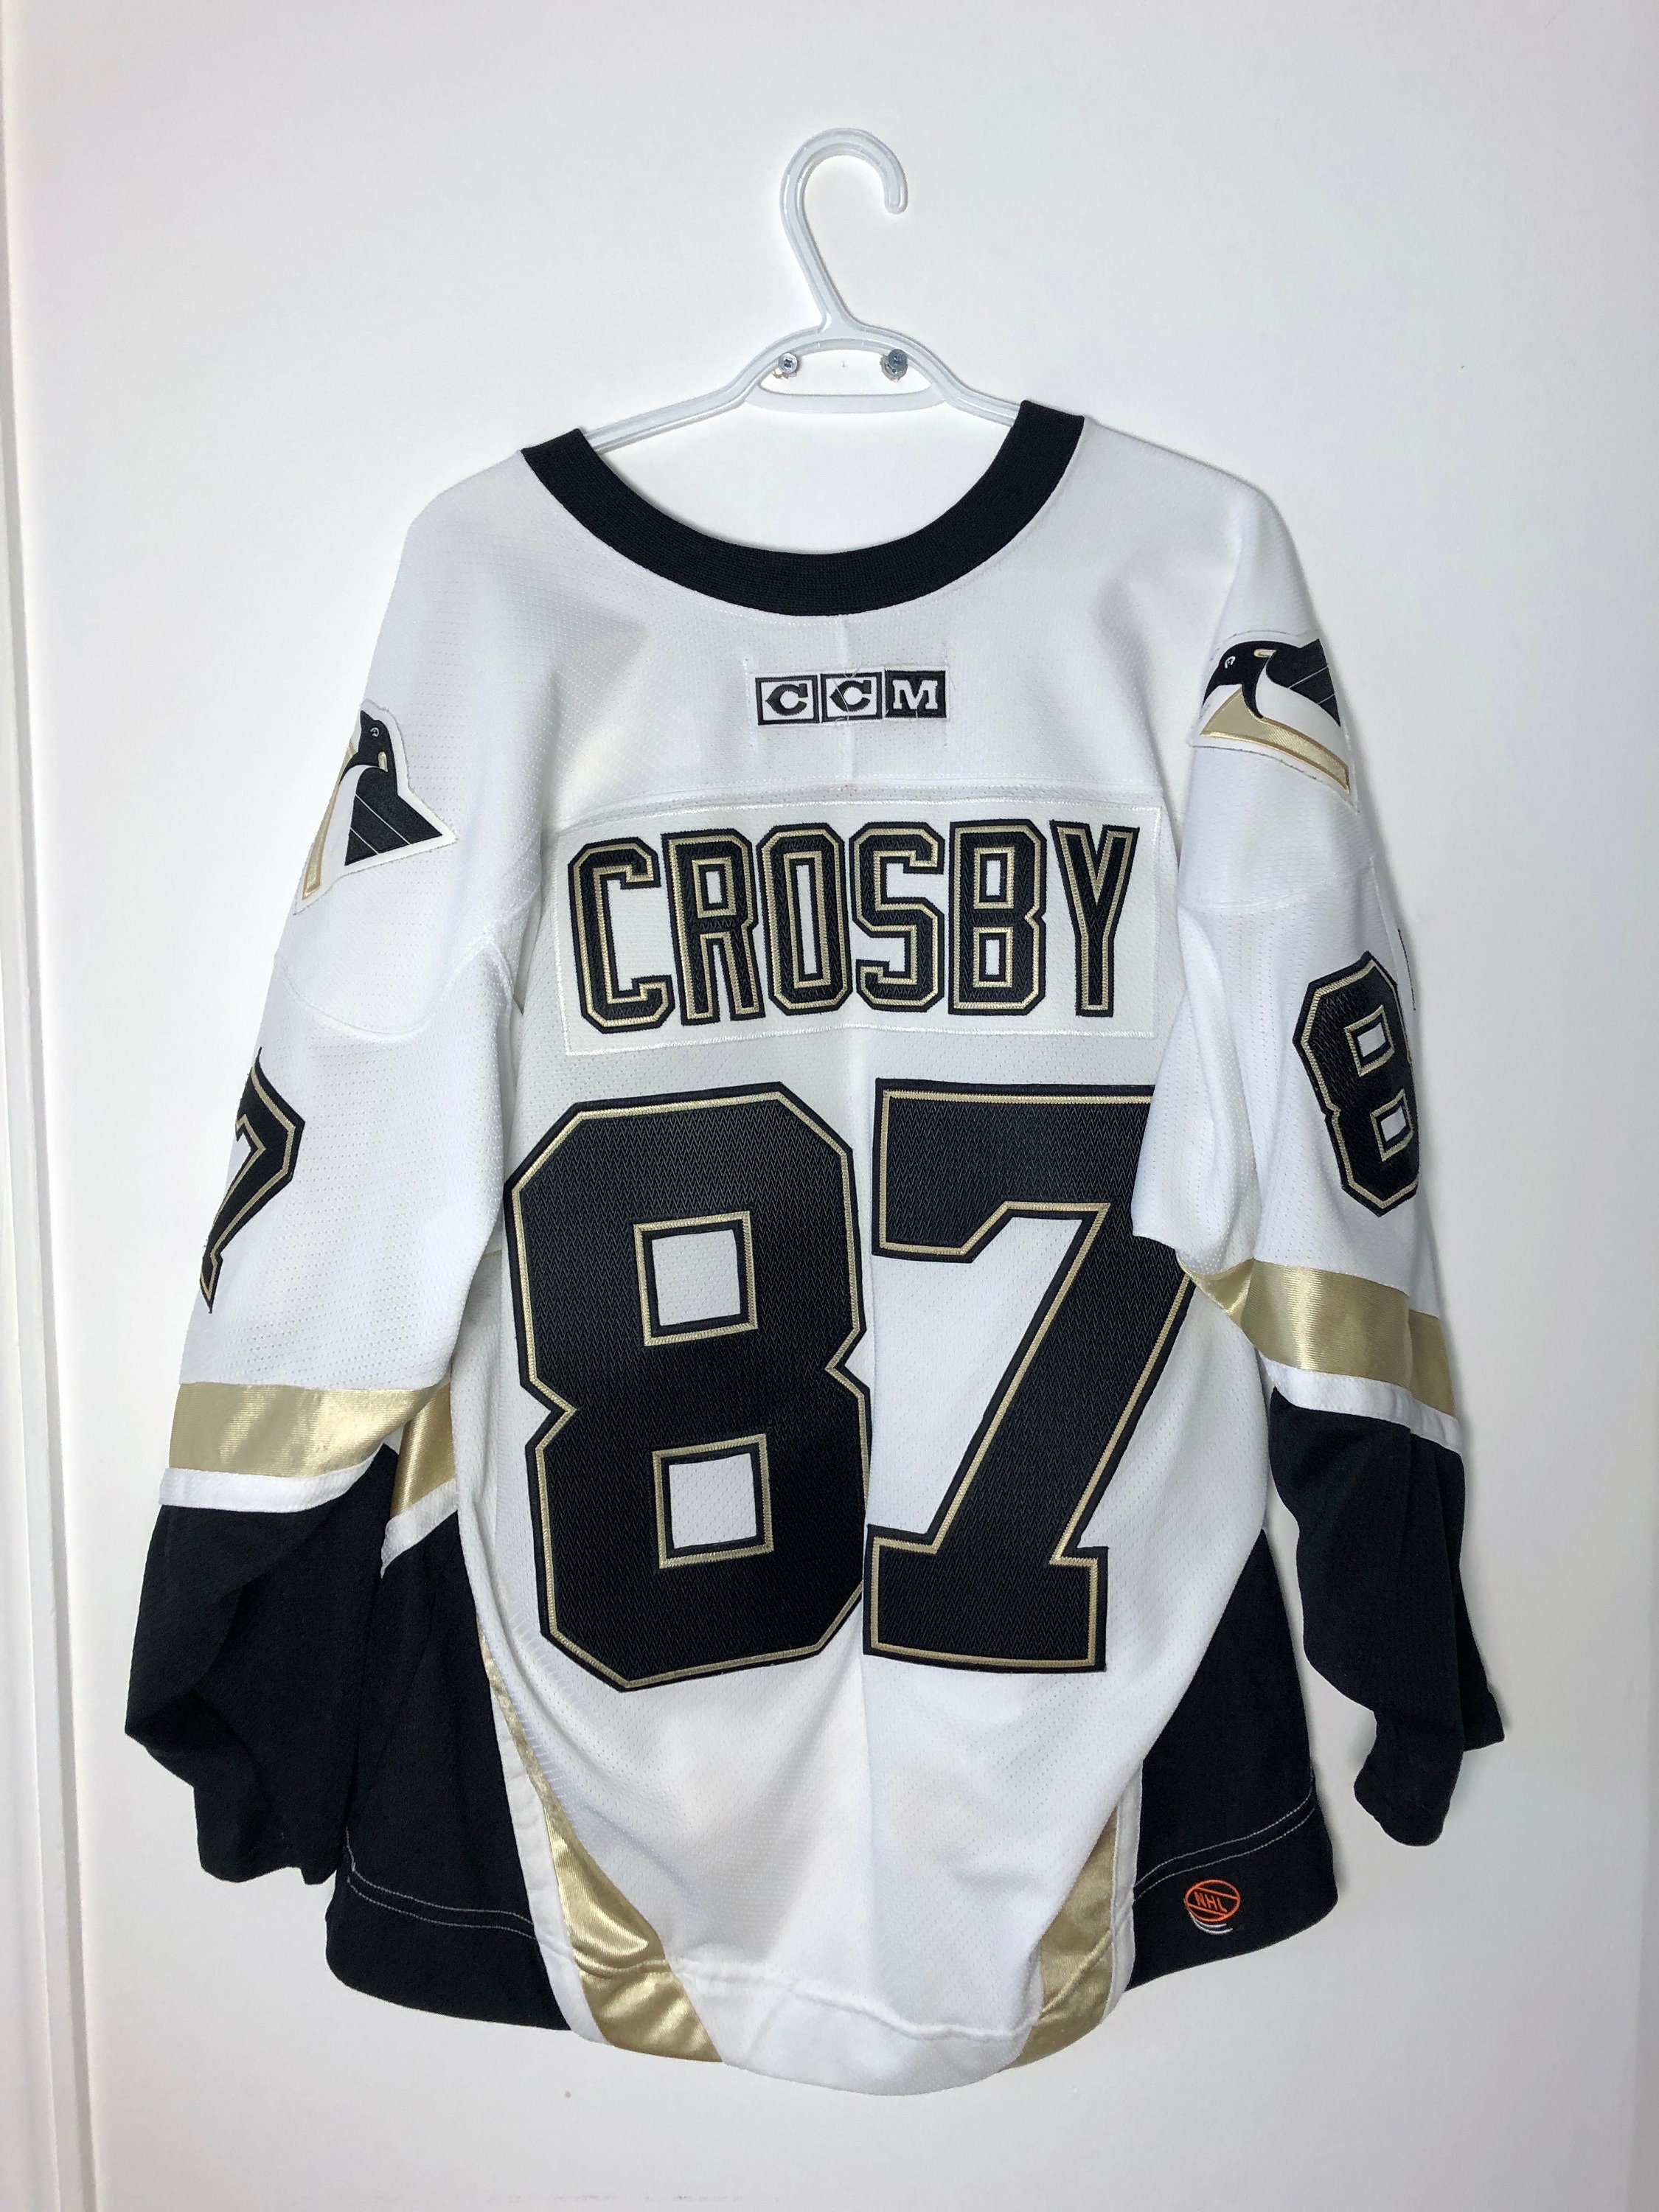 Sidney Crosby Cry Baby Youth Shirt